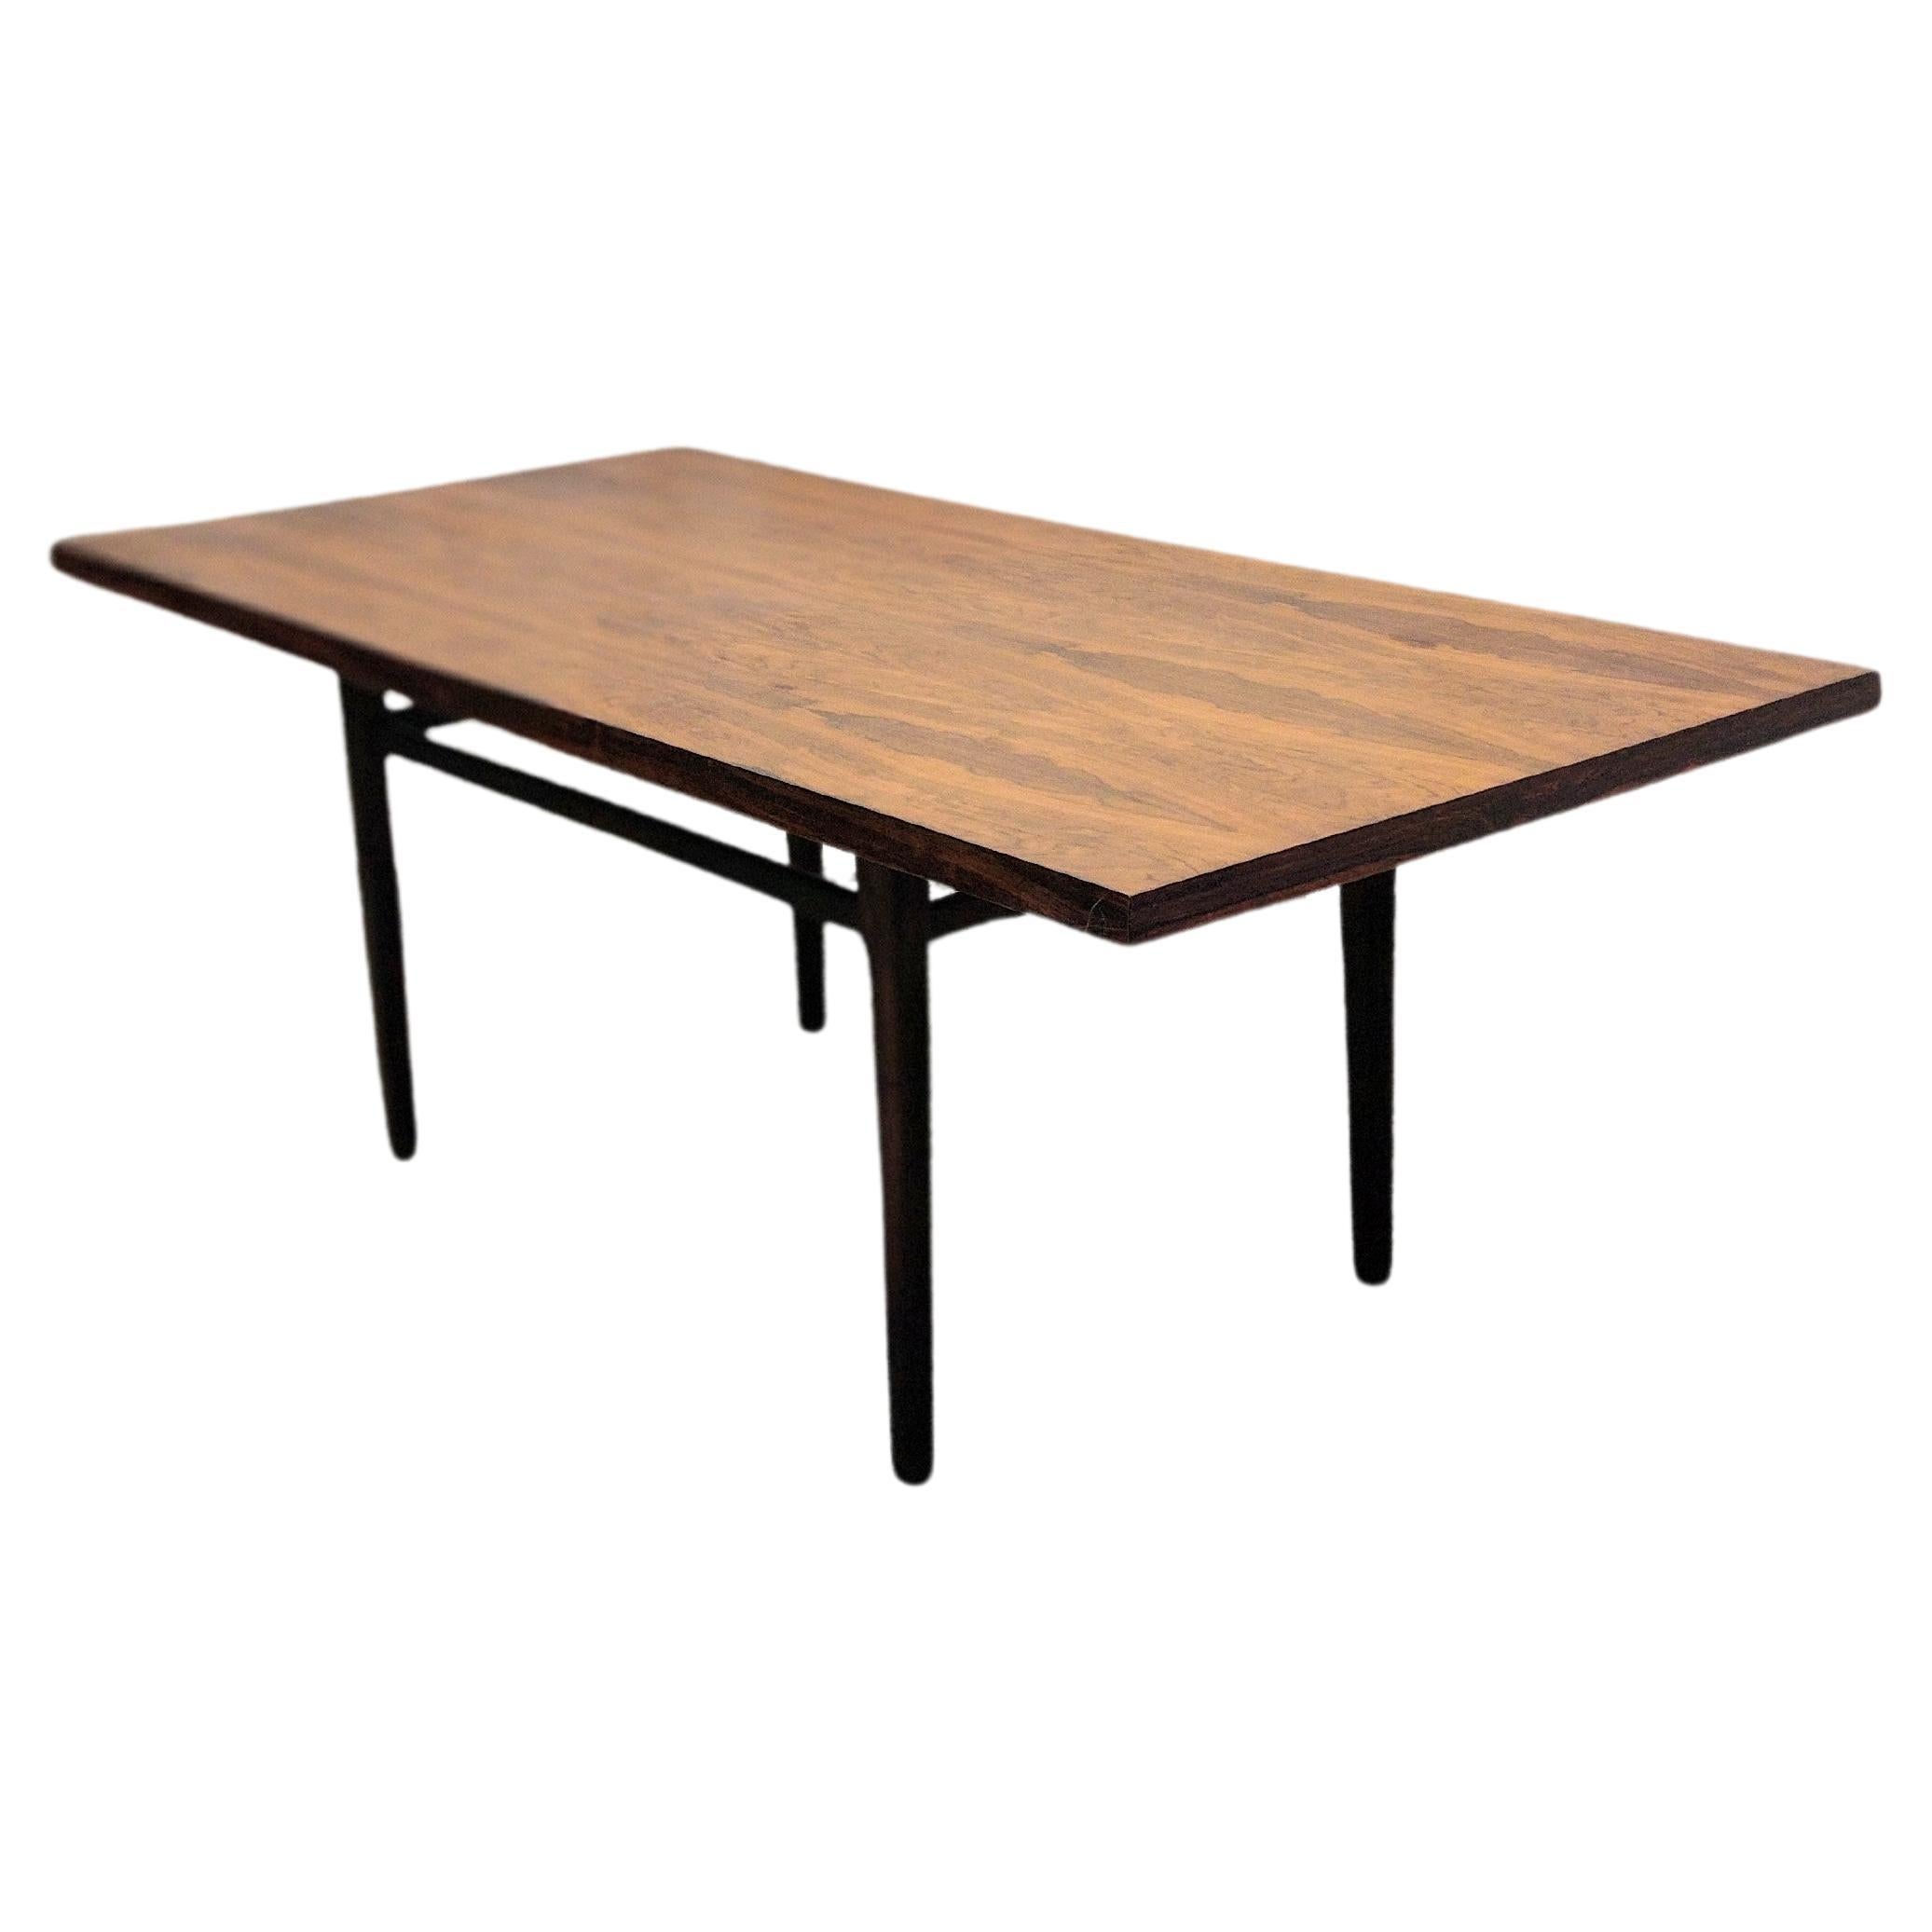 Brazilian Rectangular Table in Rosewood, 60s For Sale